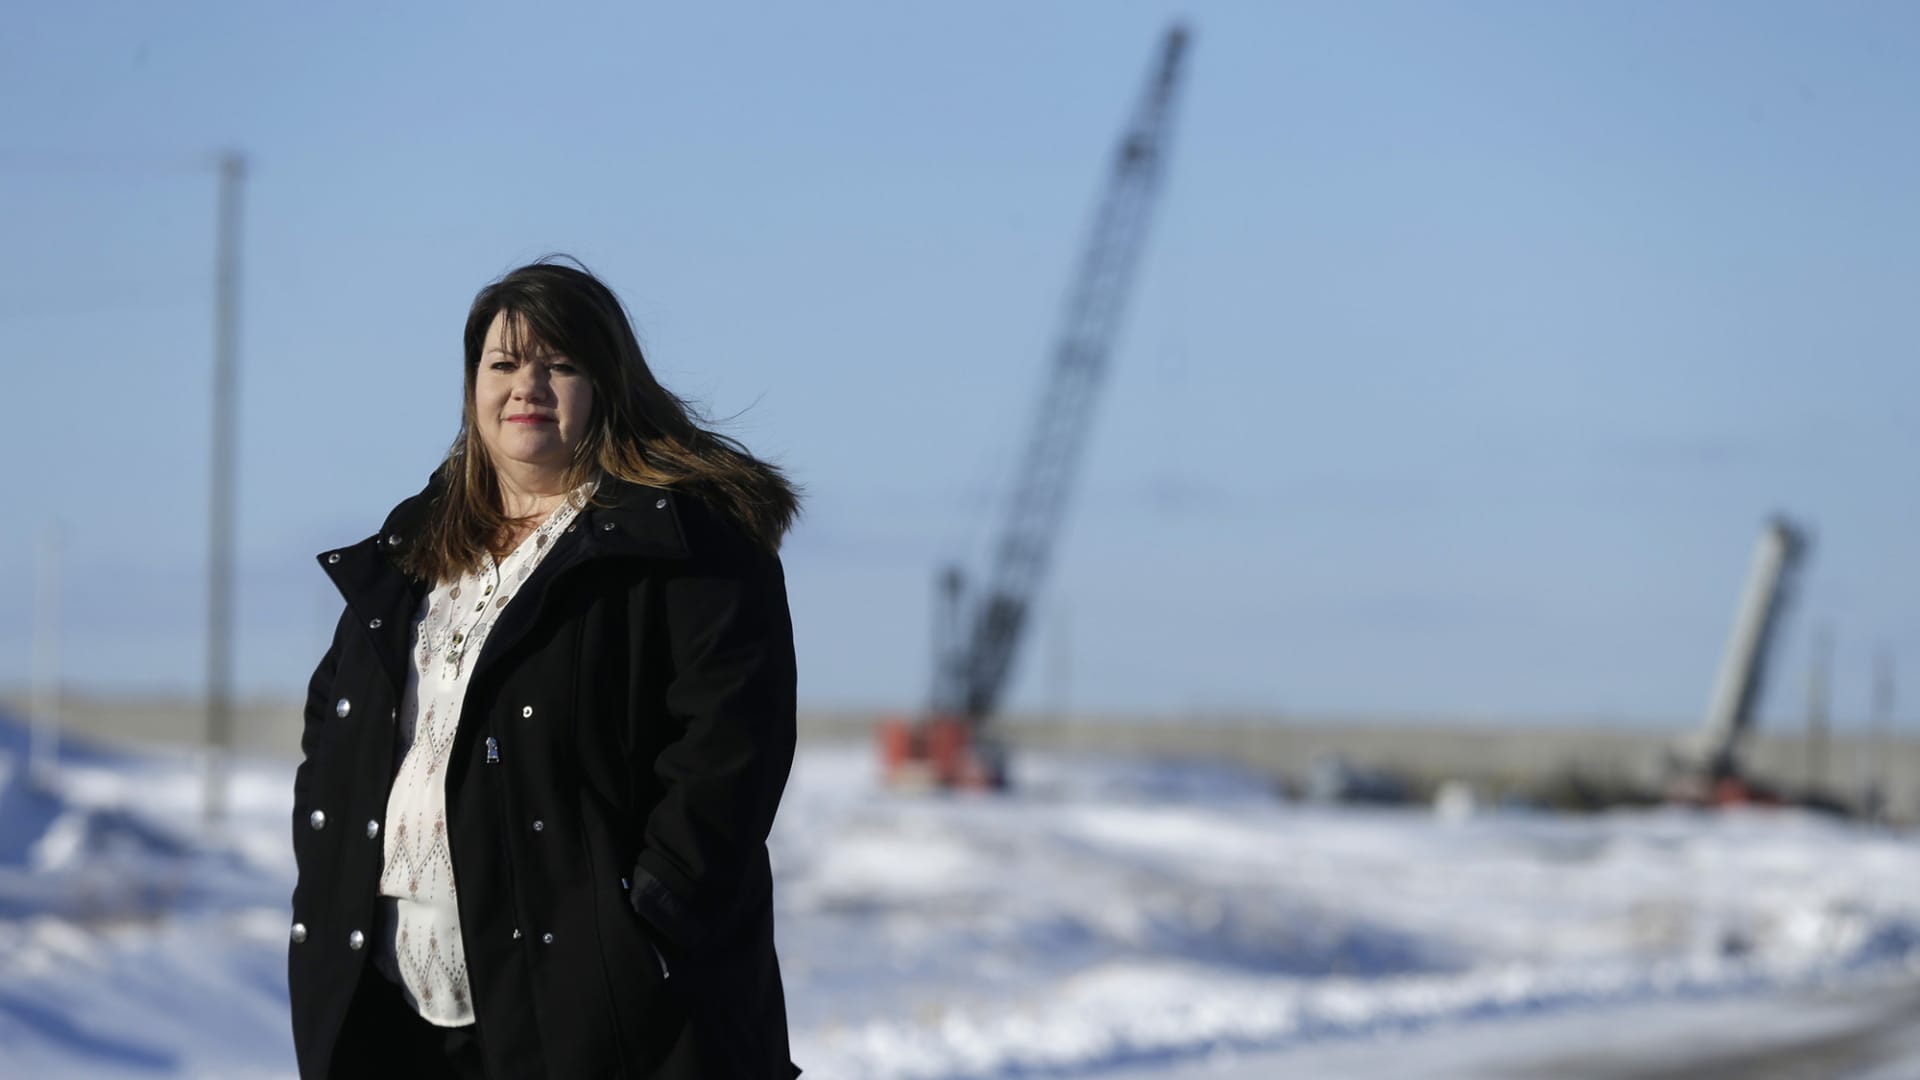 Kim Mahoney stands outside her home near the construction at Foxconn's manufacturing facility in February 2020, in Mount Pleasant, Wisconsin.